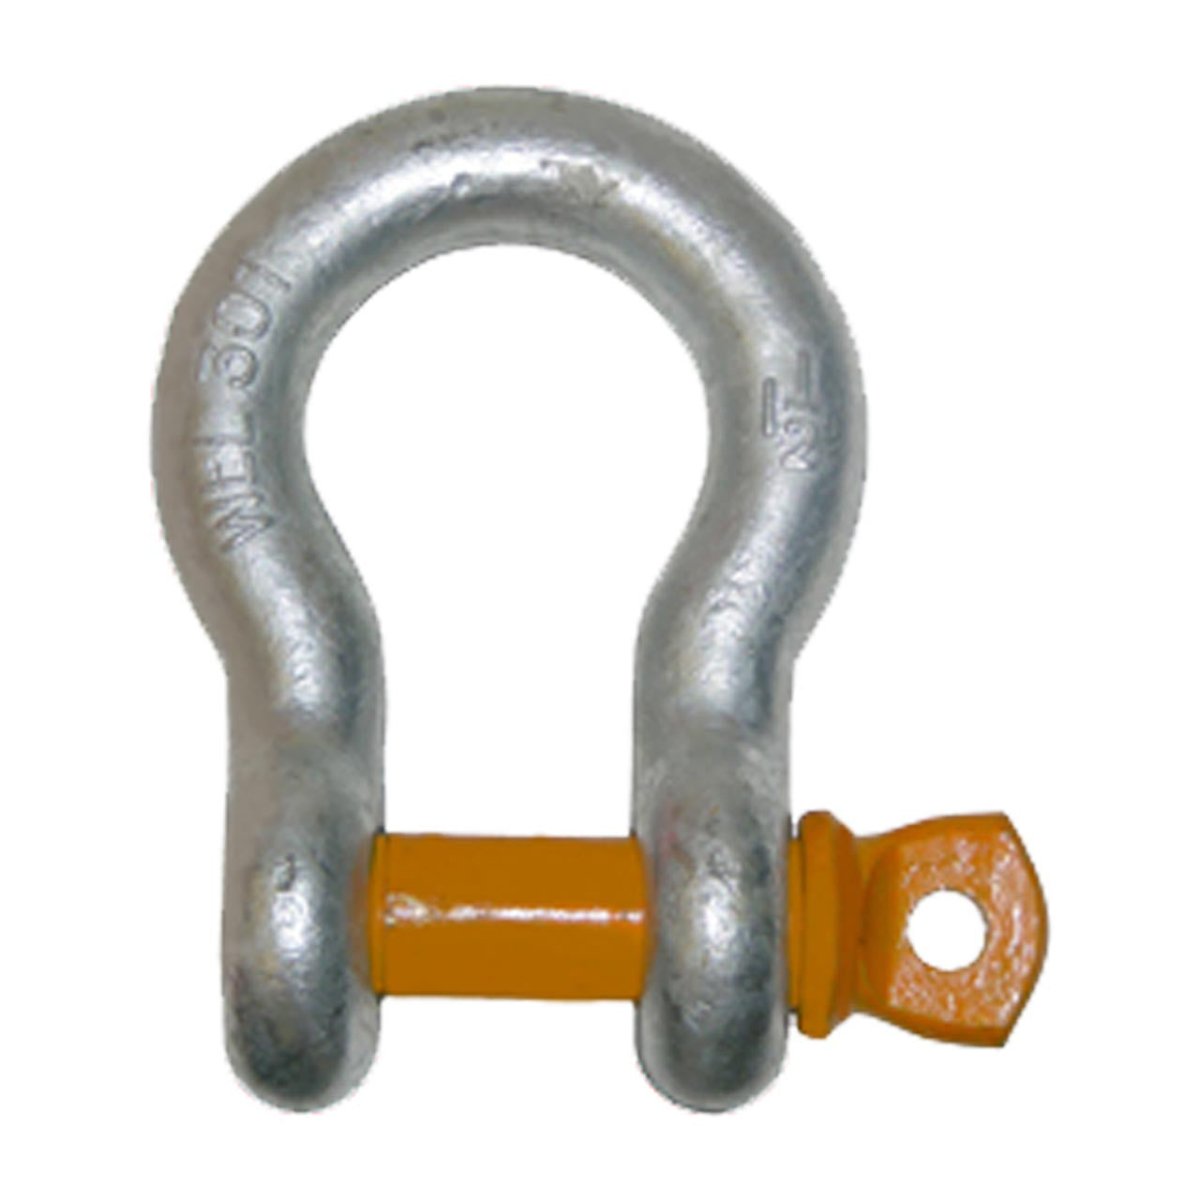 B/A Products Co. Alloy Screw Pin Anchor Shackle - starequipmentsales